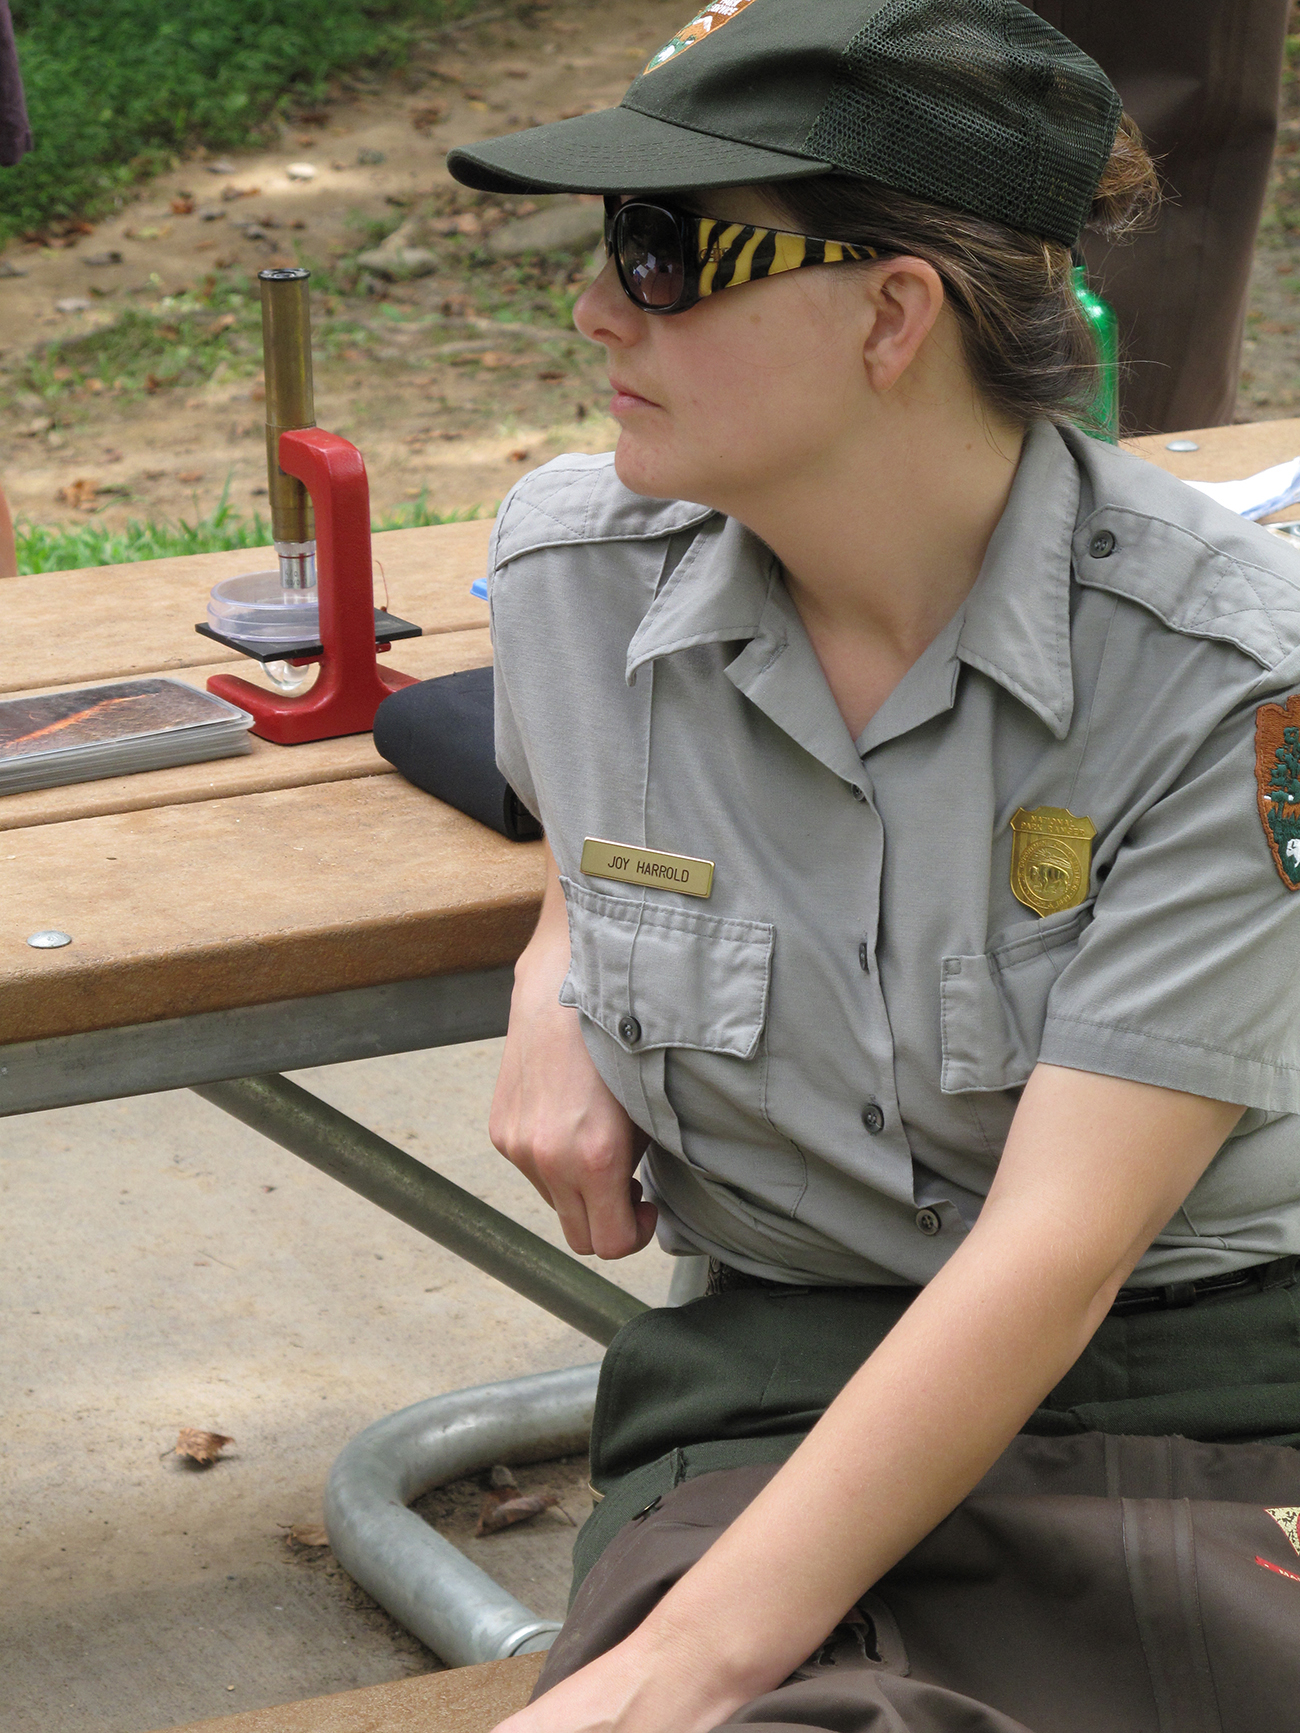 A park ranger, wearing an official uniform and badge, sits at a picnic table outside.